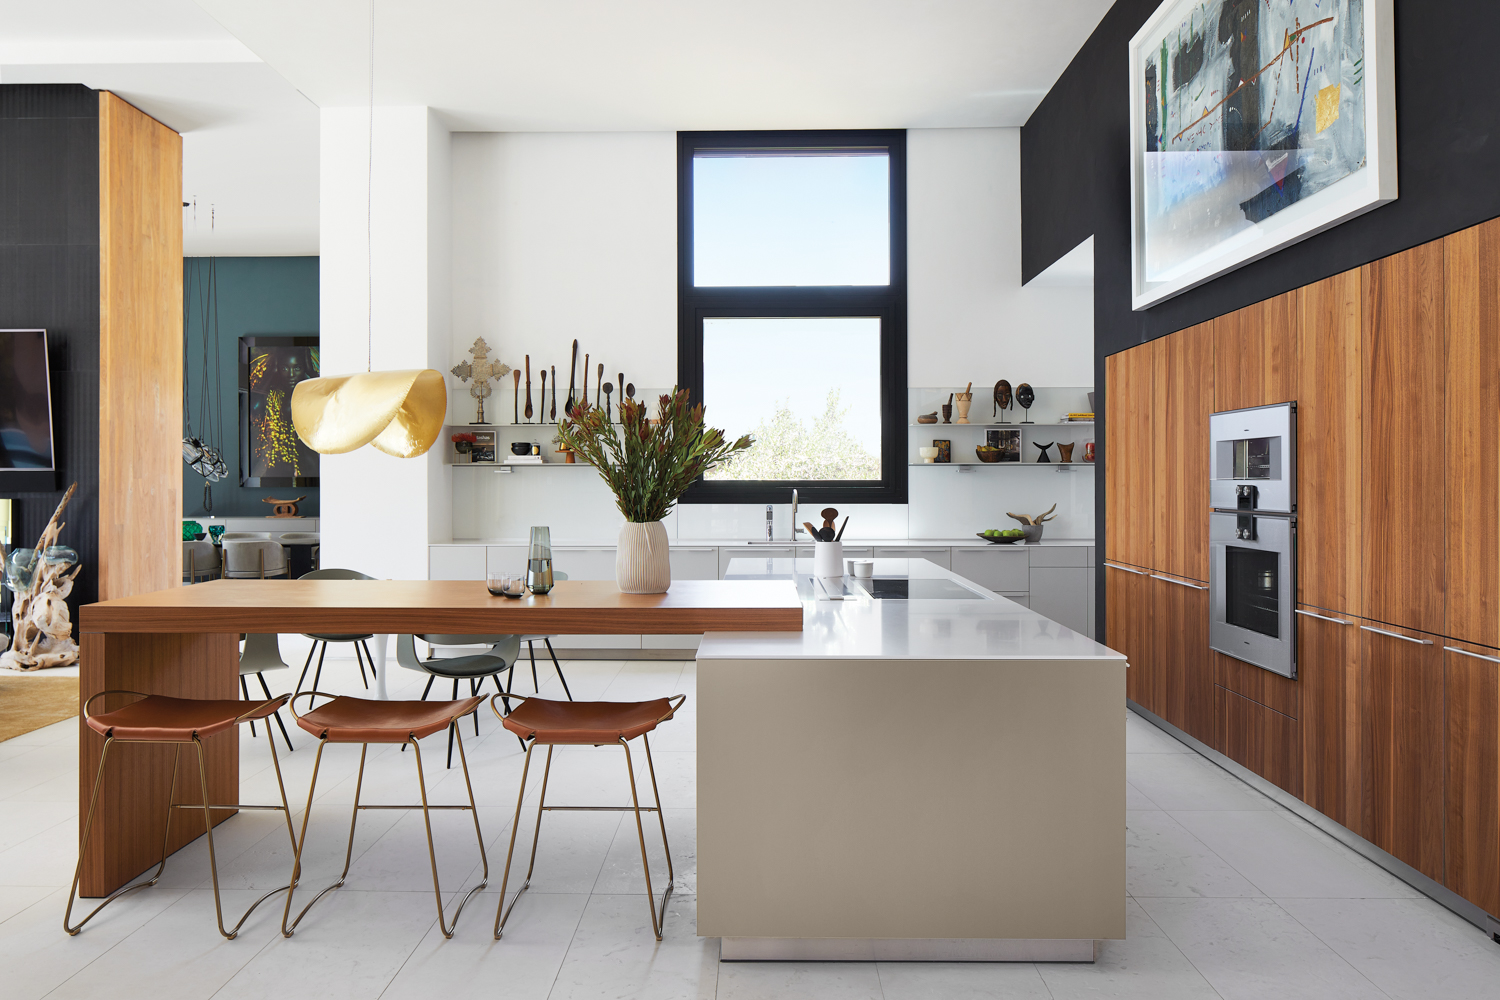 A kitchen with a walnut countertop overlapping a white island. The appliances are built into the walnut cabinetry.